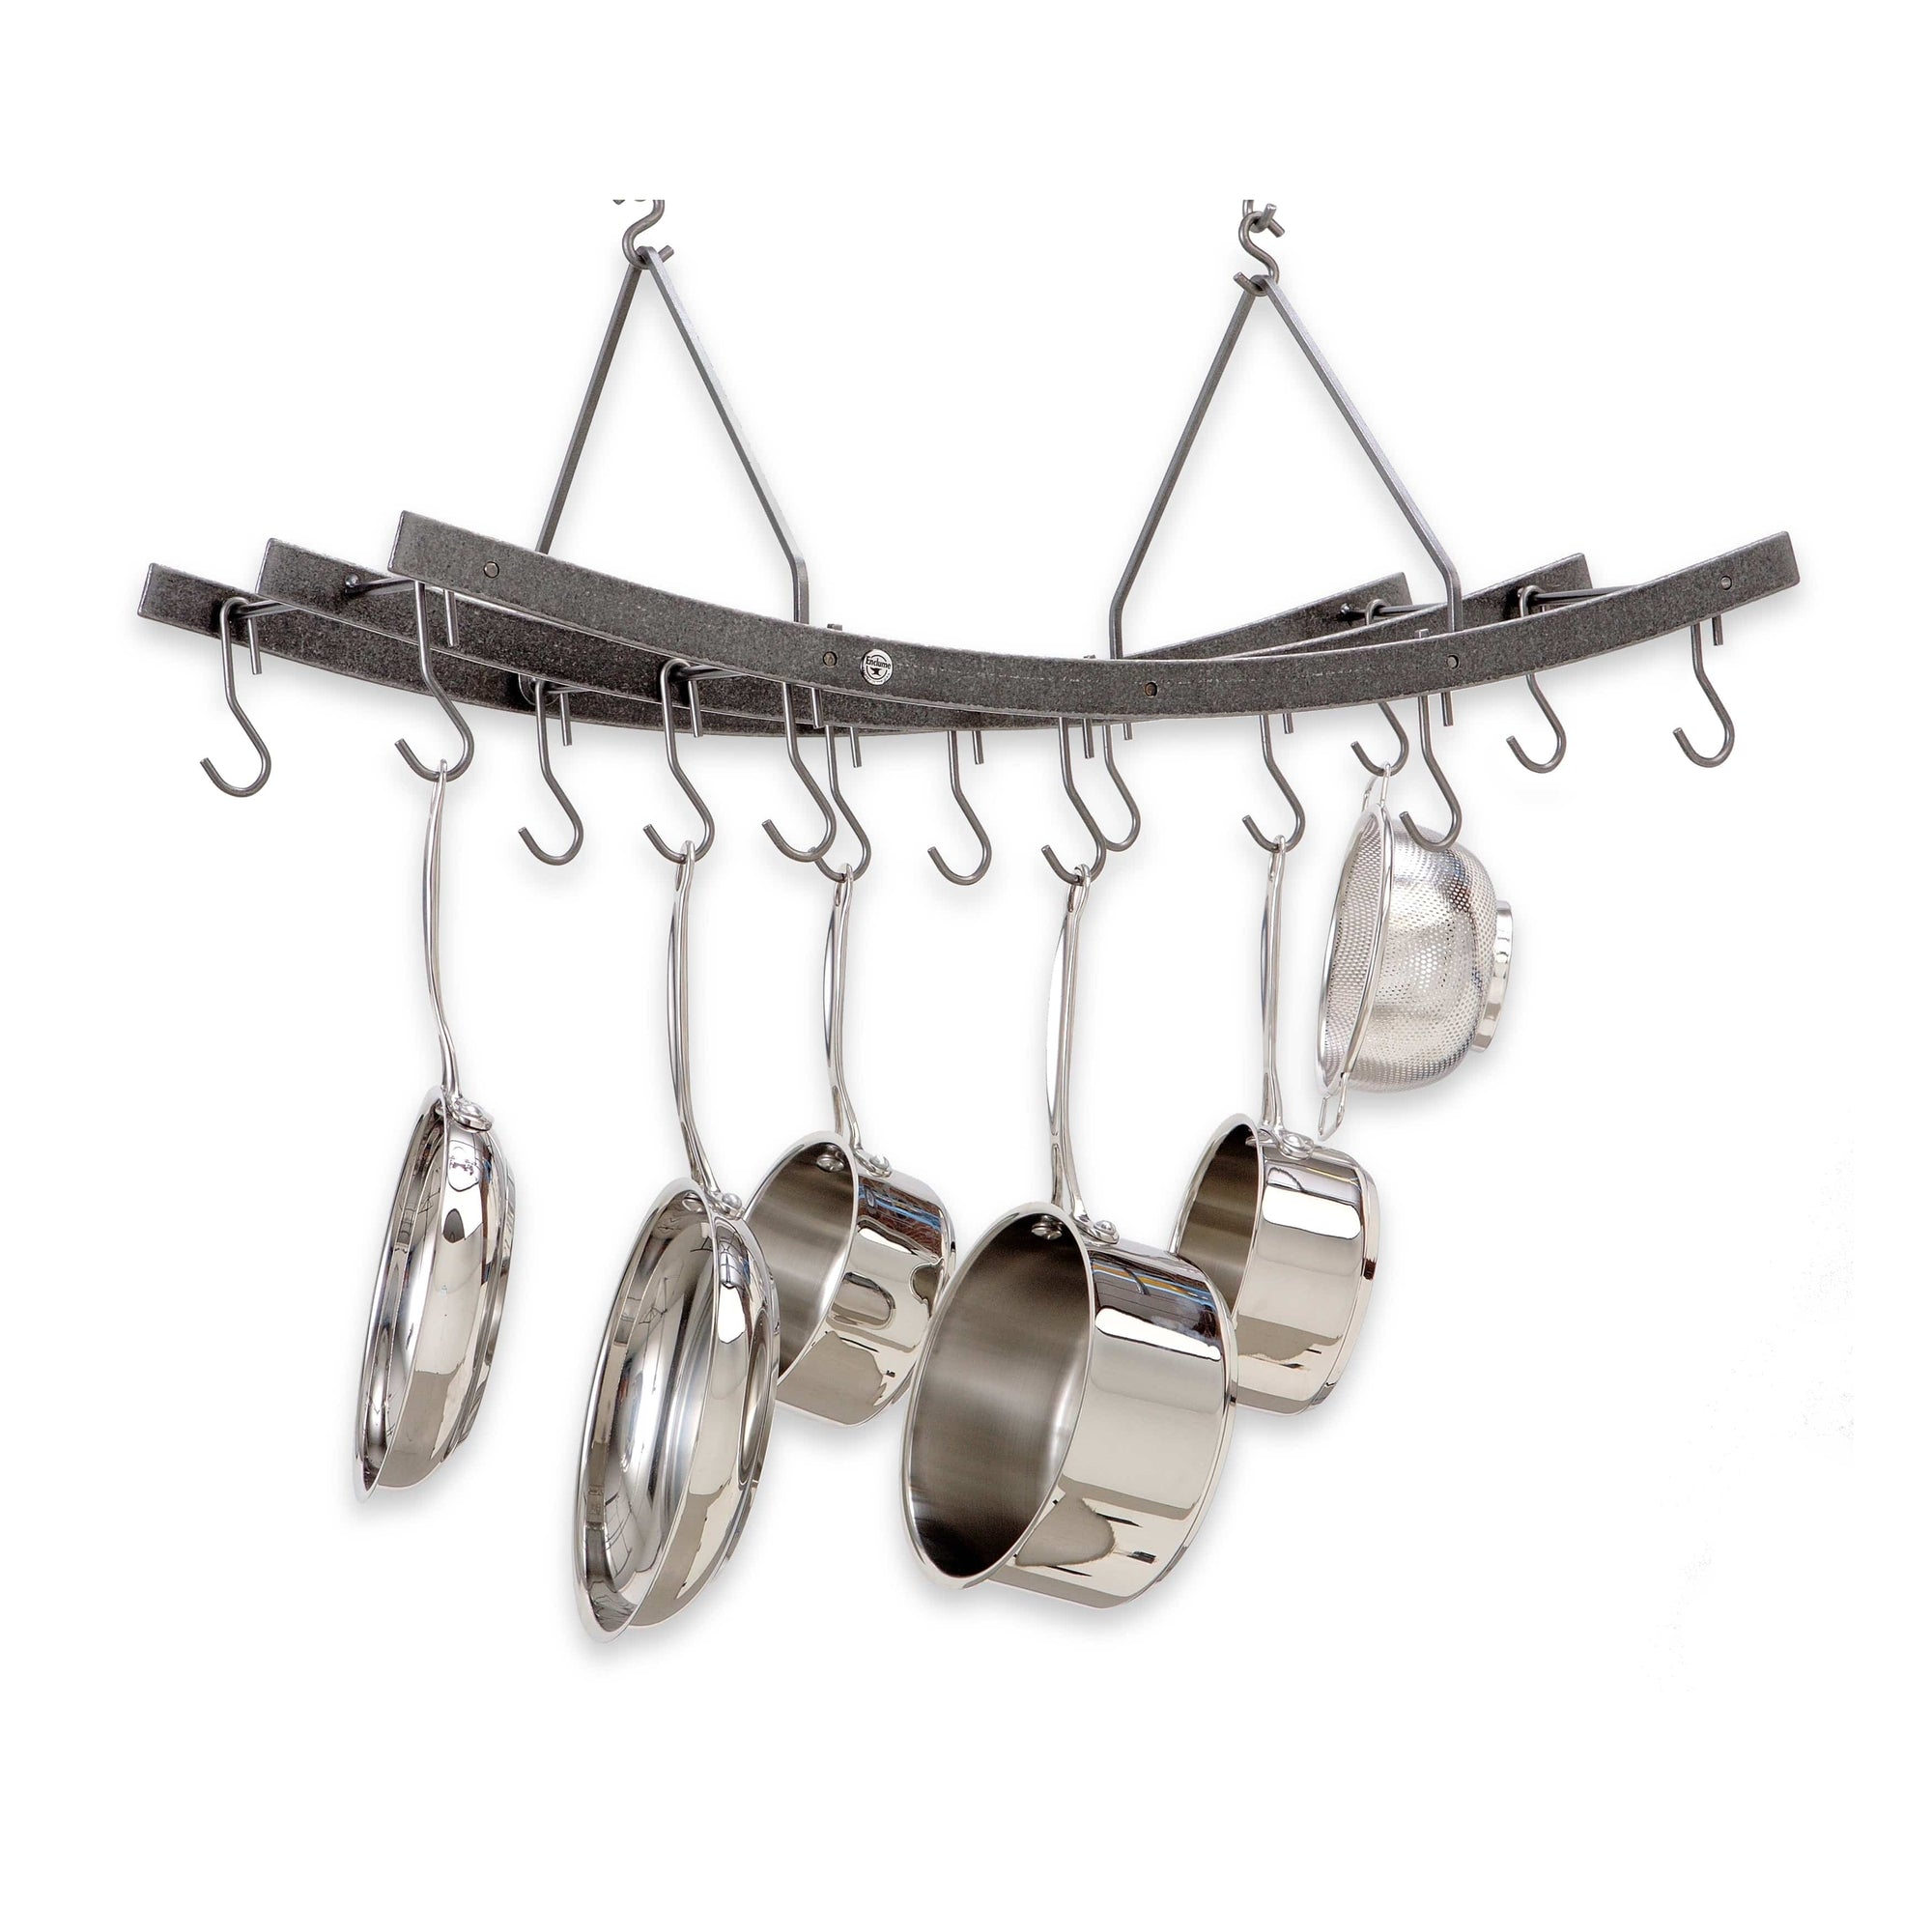 Enclume - Three Bar Ceiling Pot Rack in Hammered Steel - Enclume